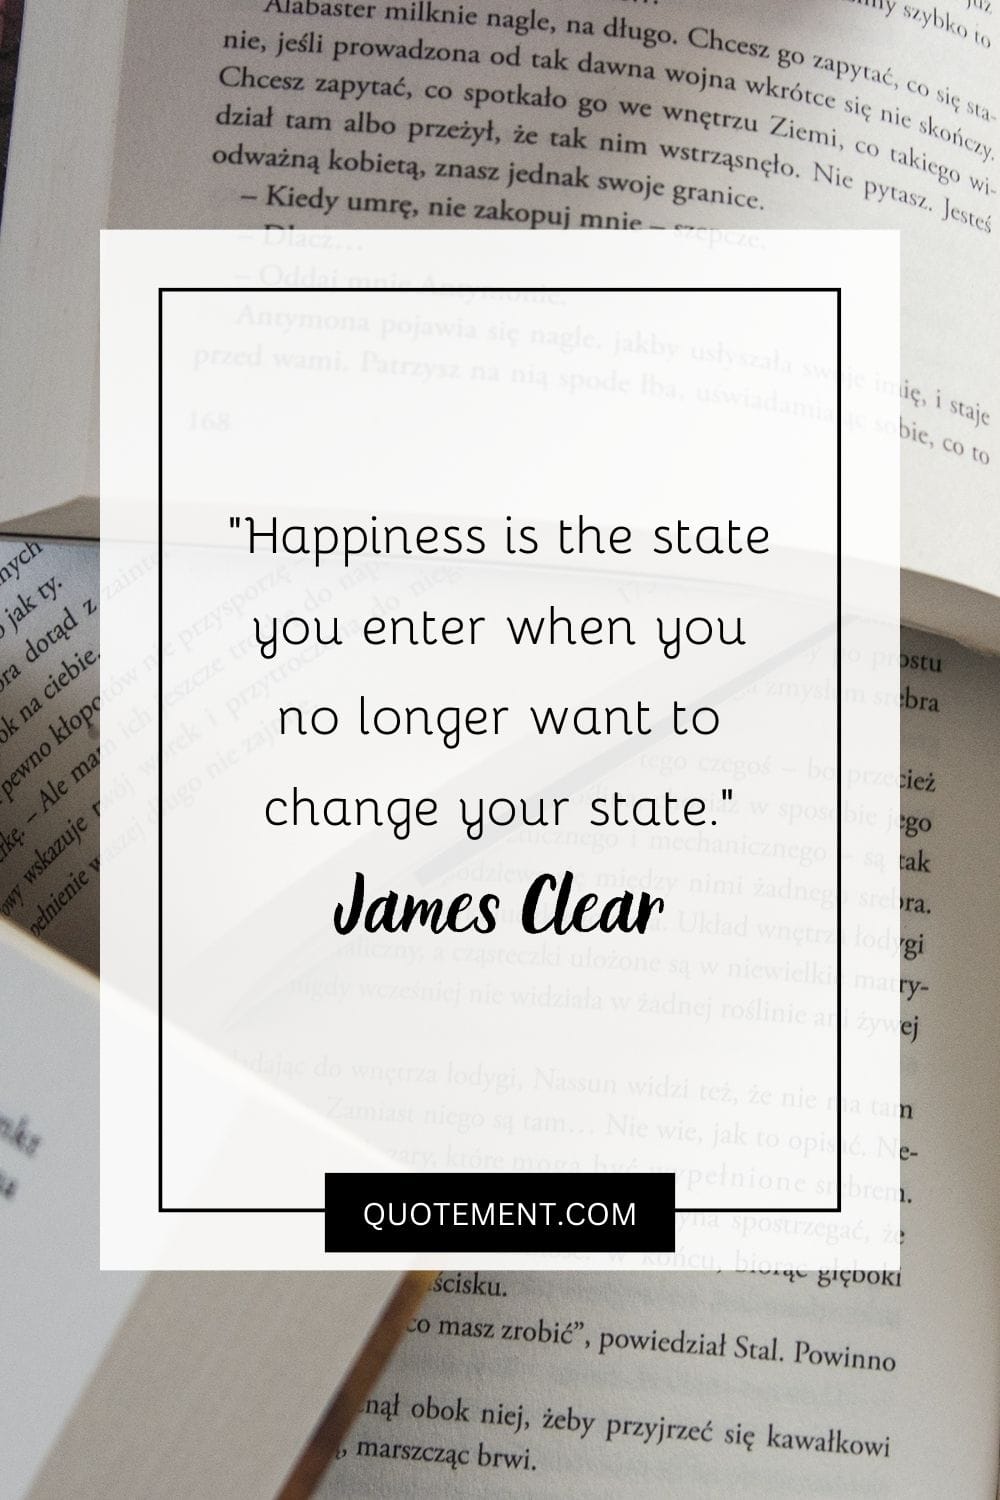 Happiness is the state you enter when you no longer want to change your state